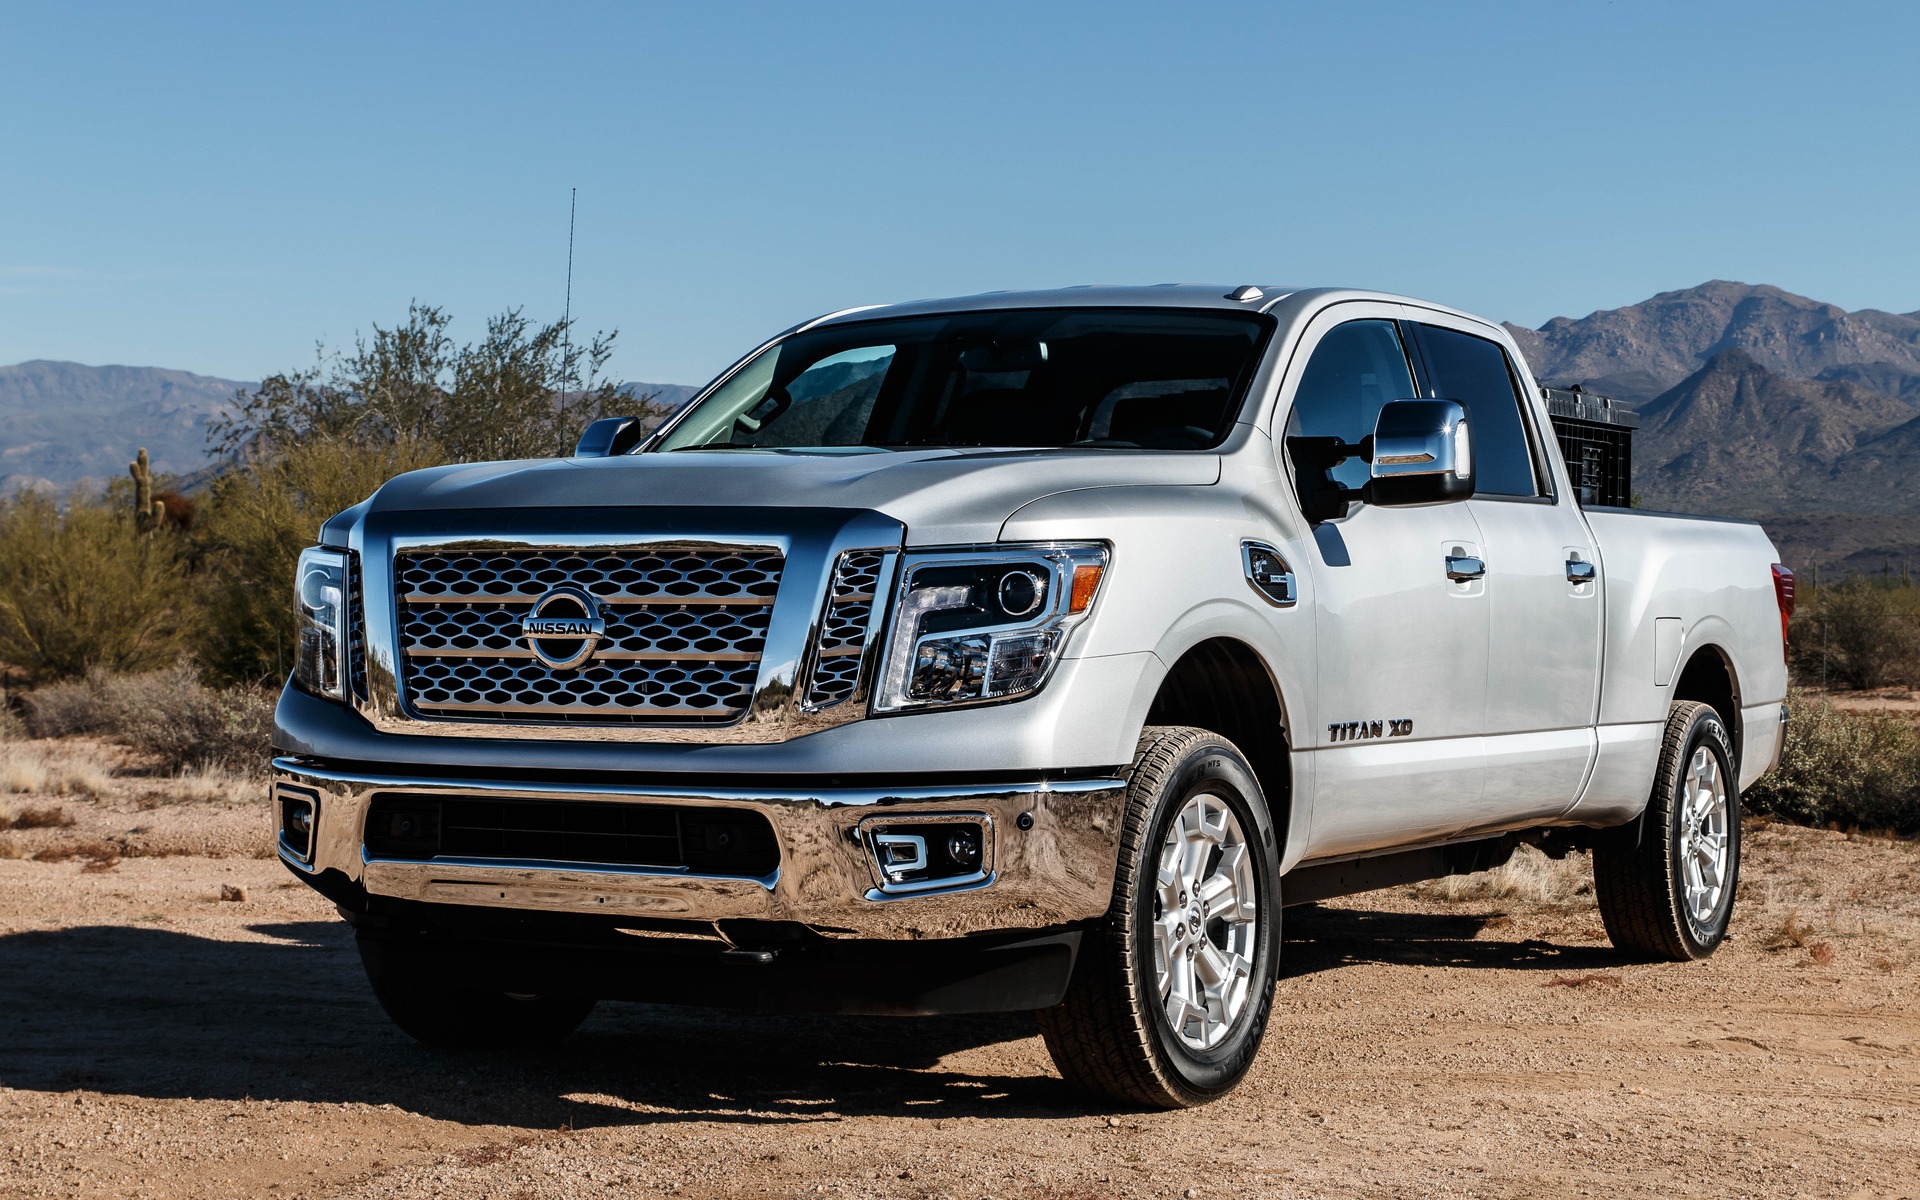 2016 Nissan Titan XD: Fitting In With The Big Boys - The Car Guide